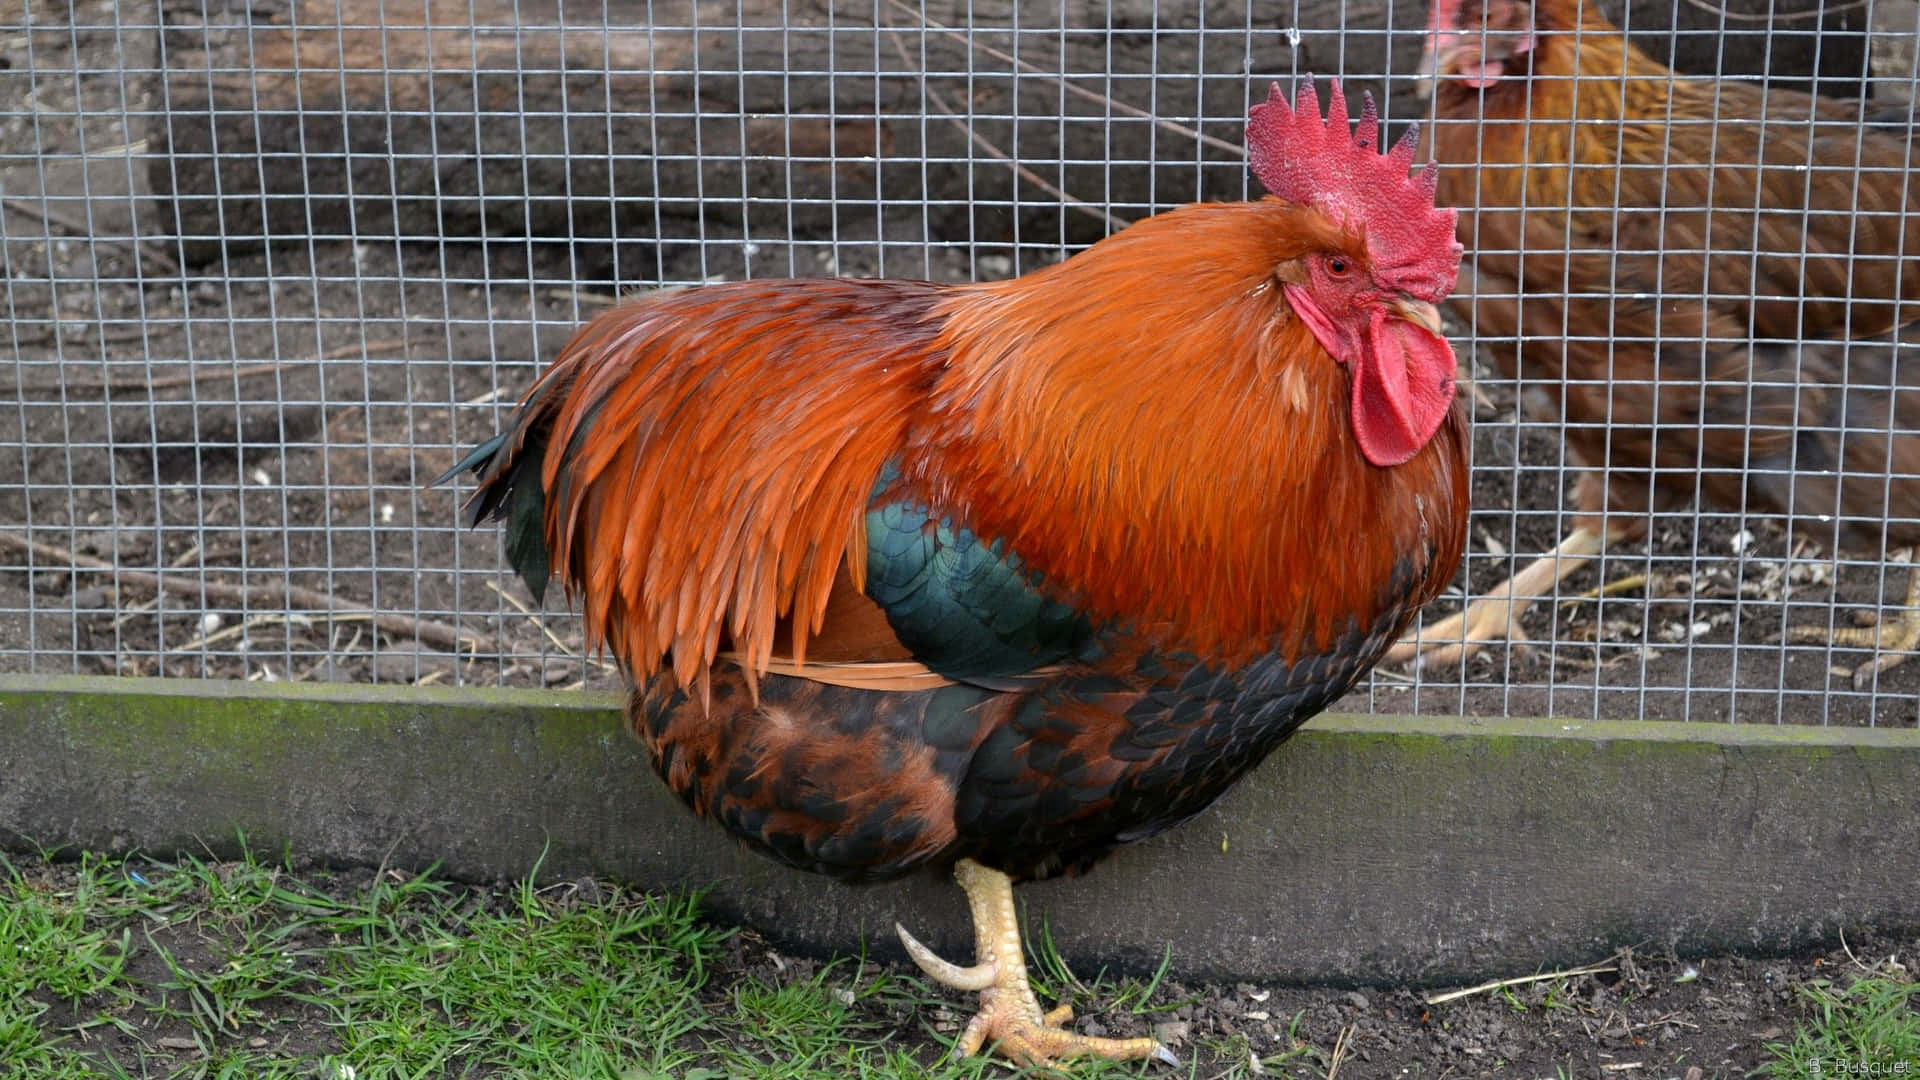 A Rooster In A Cage